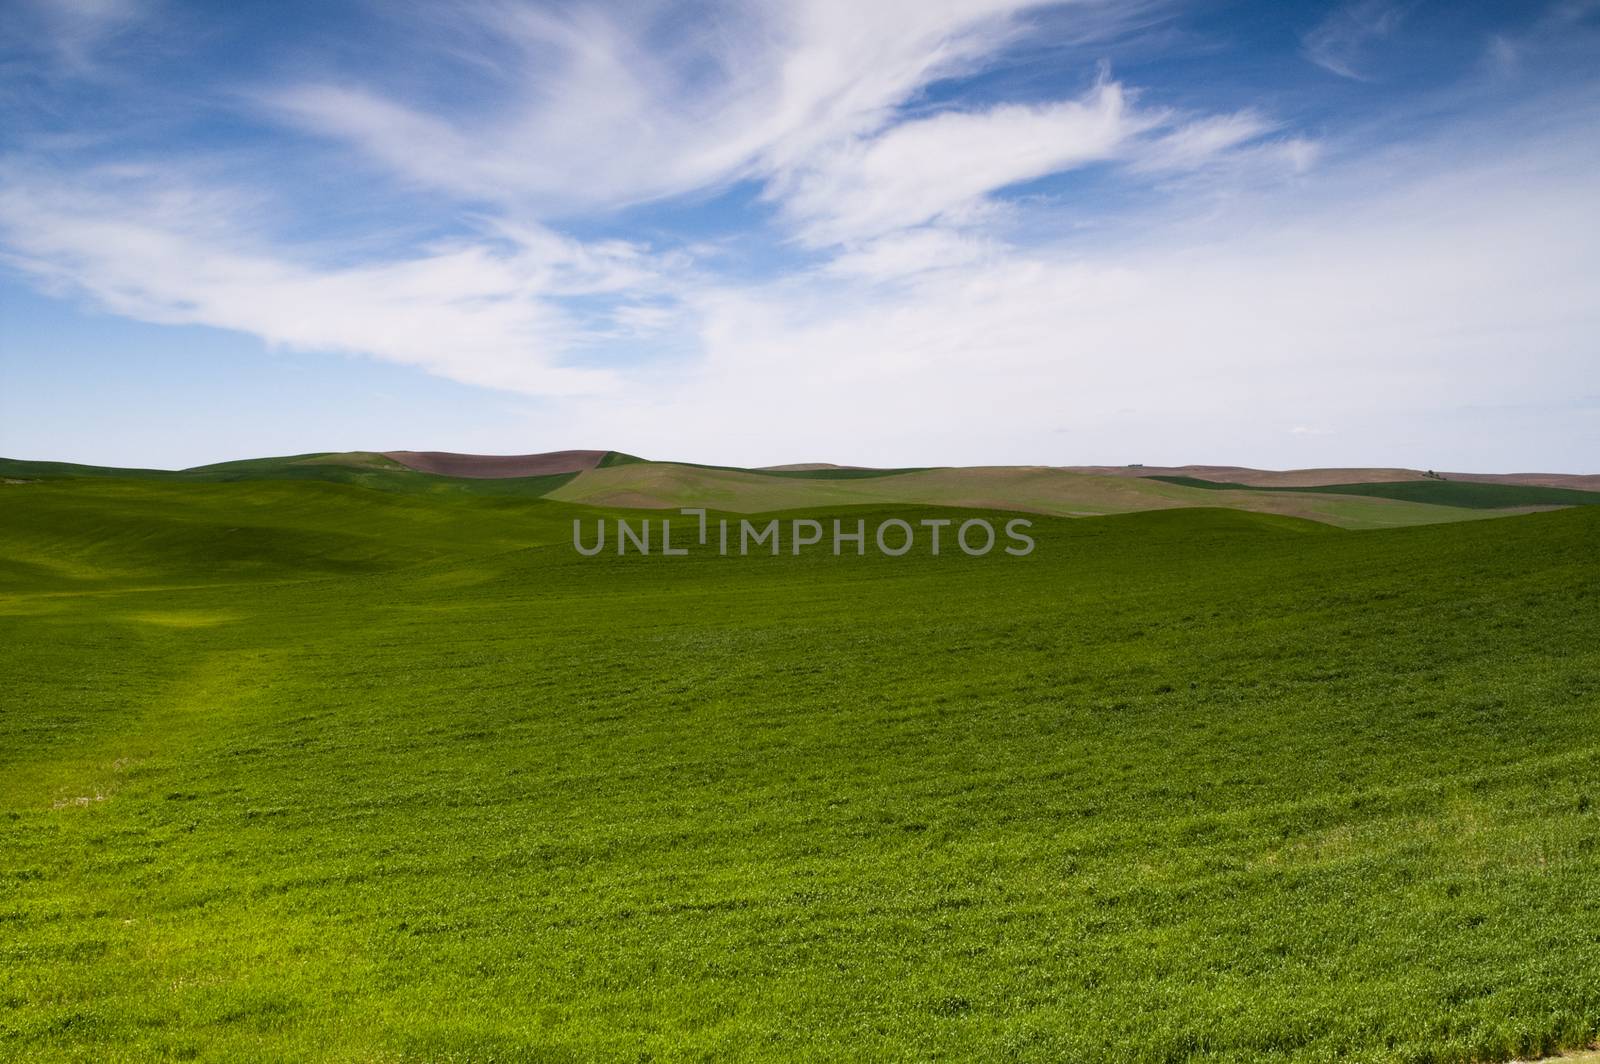 A beautiful day in the Palouse countryside the great northwest United States